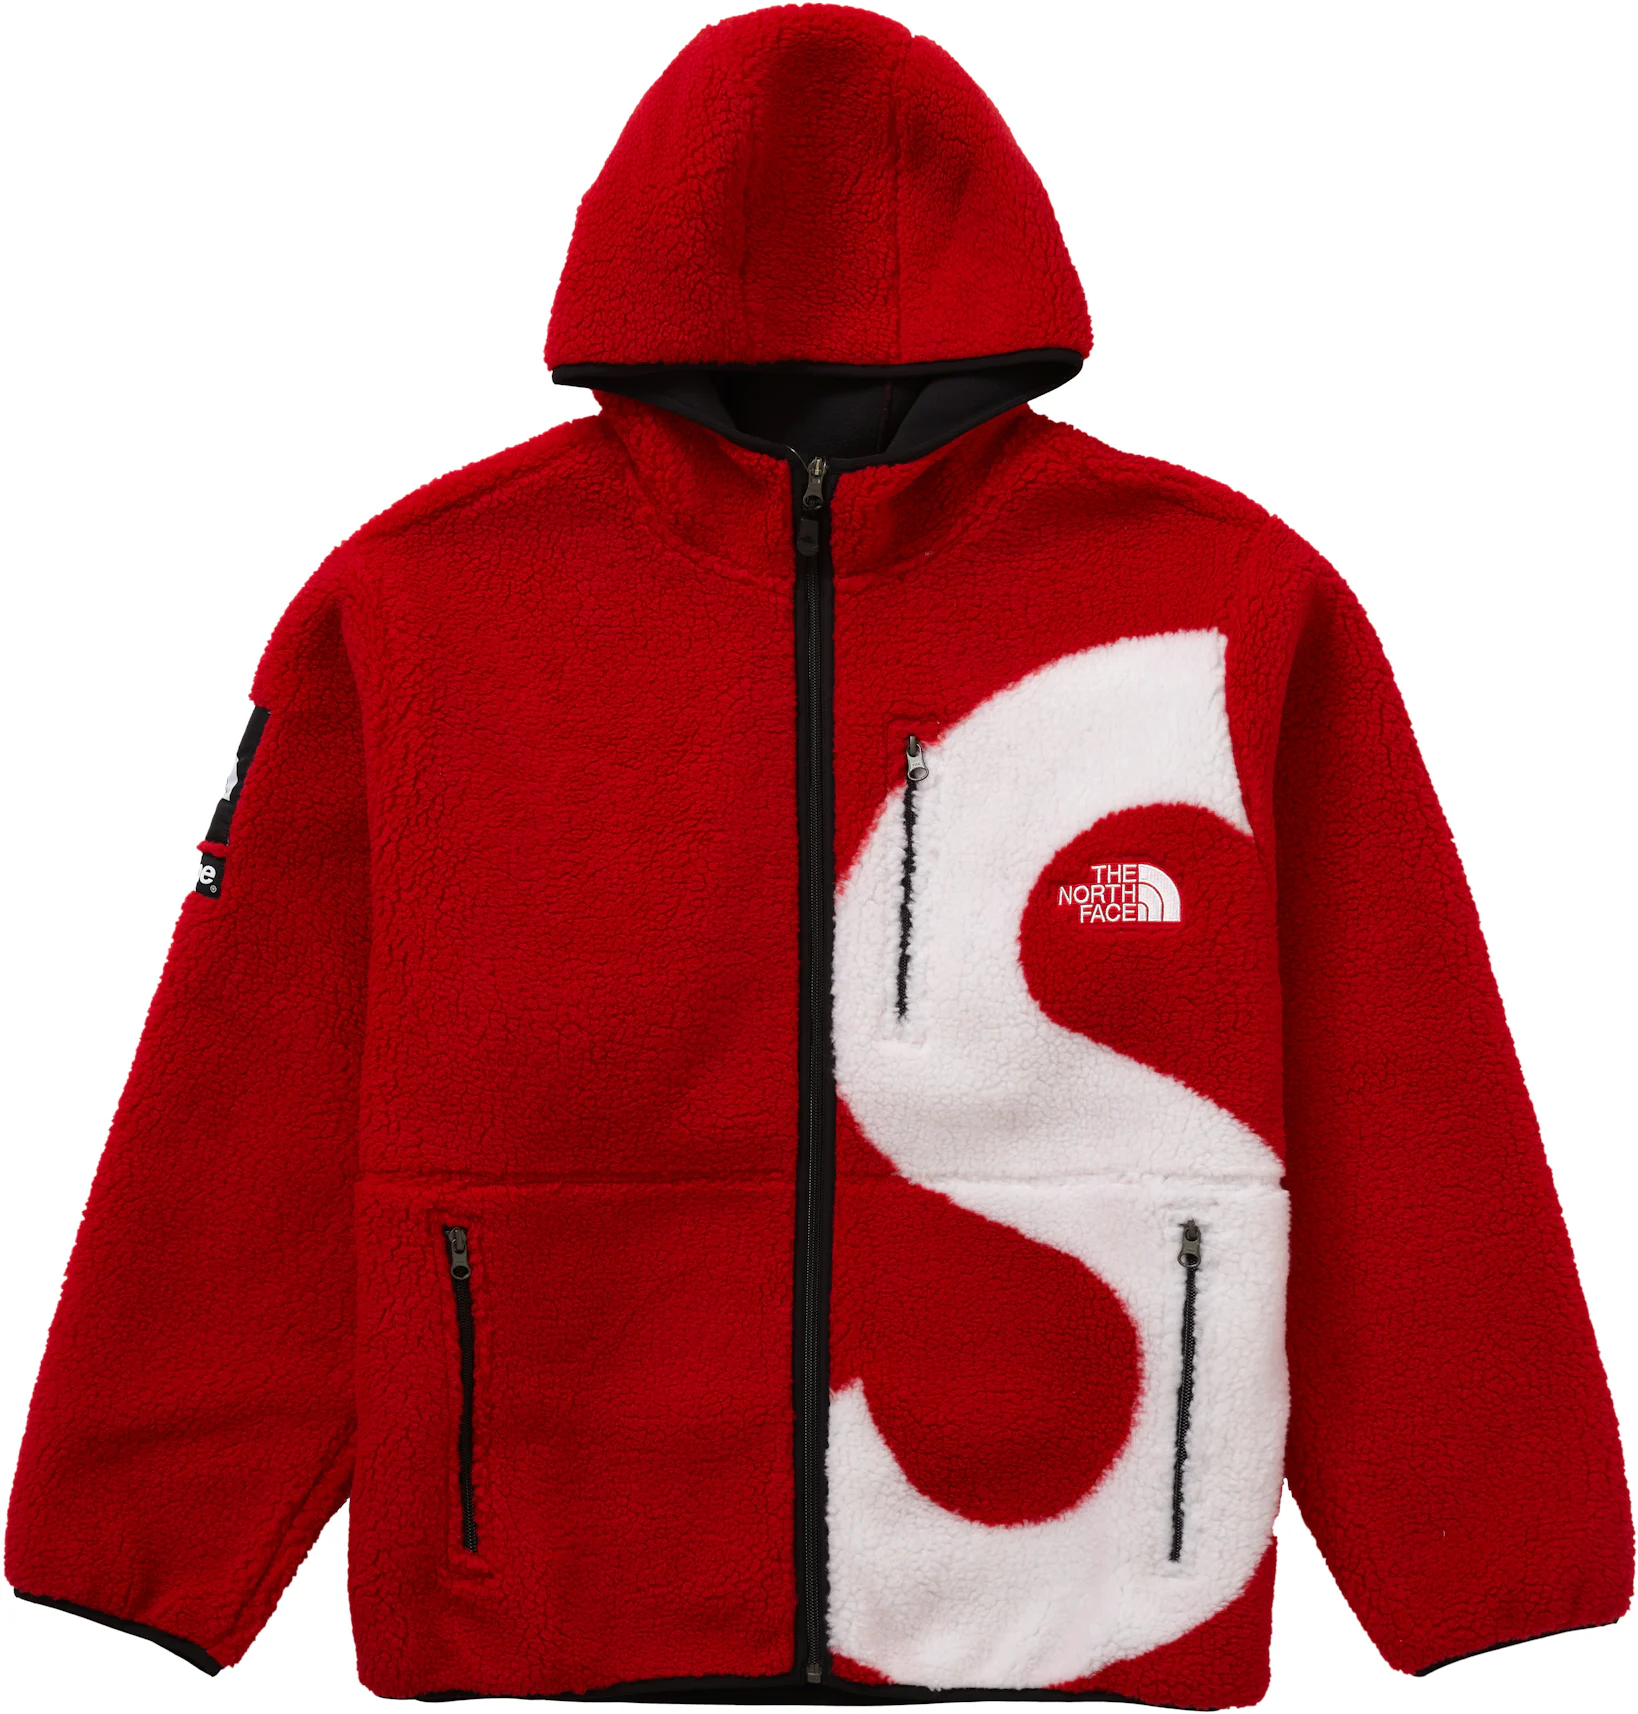 The North Face Red Fleece Jackets